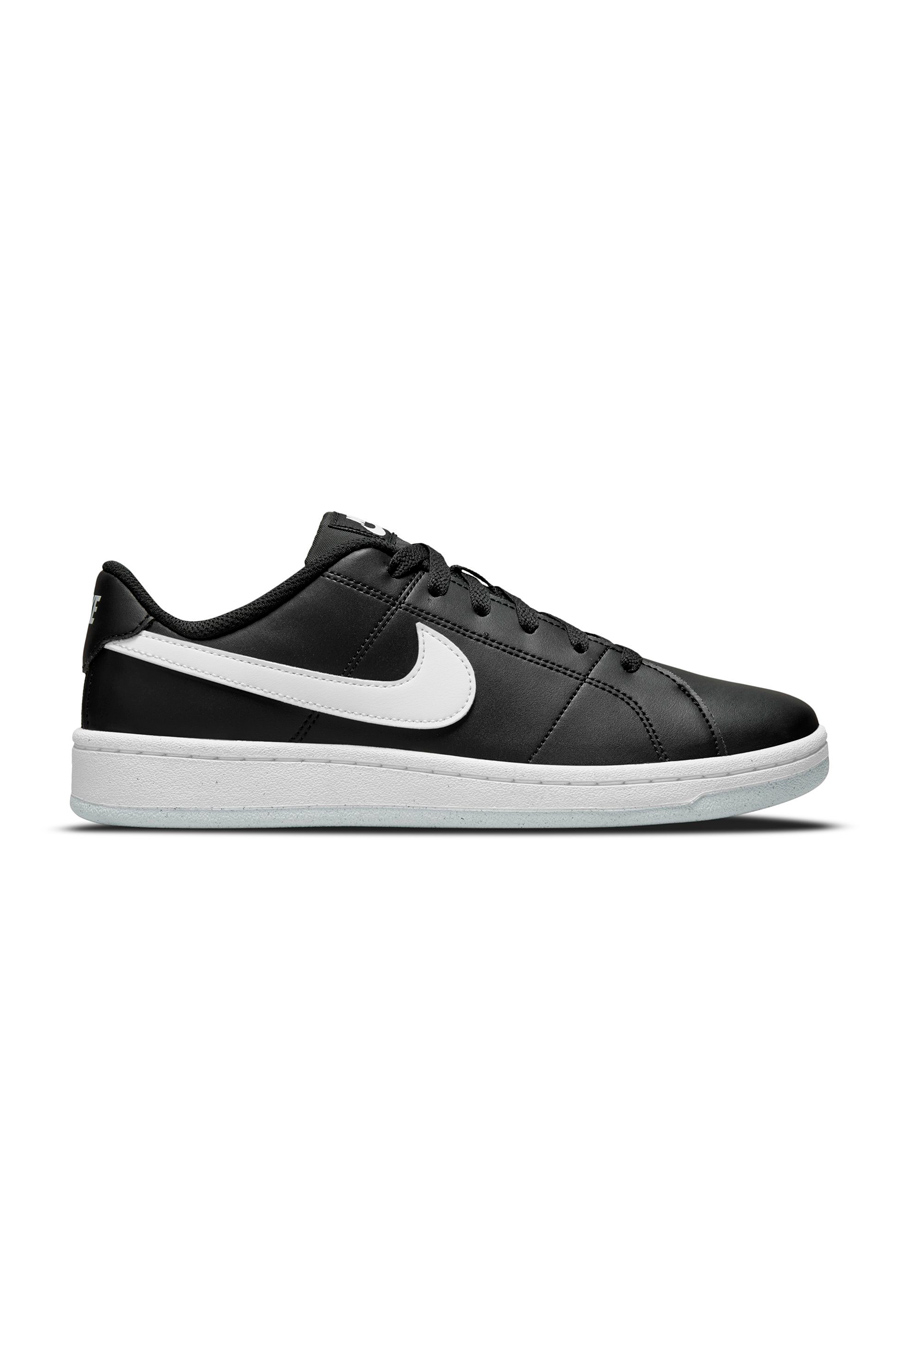 NIKE COURT ROYALE 2 NN SNEAKERS nero per donna